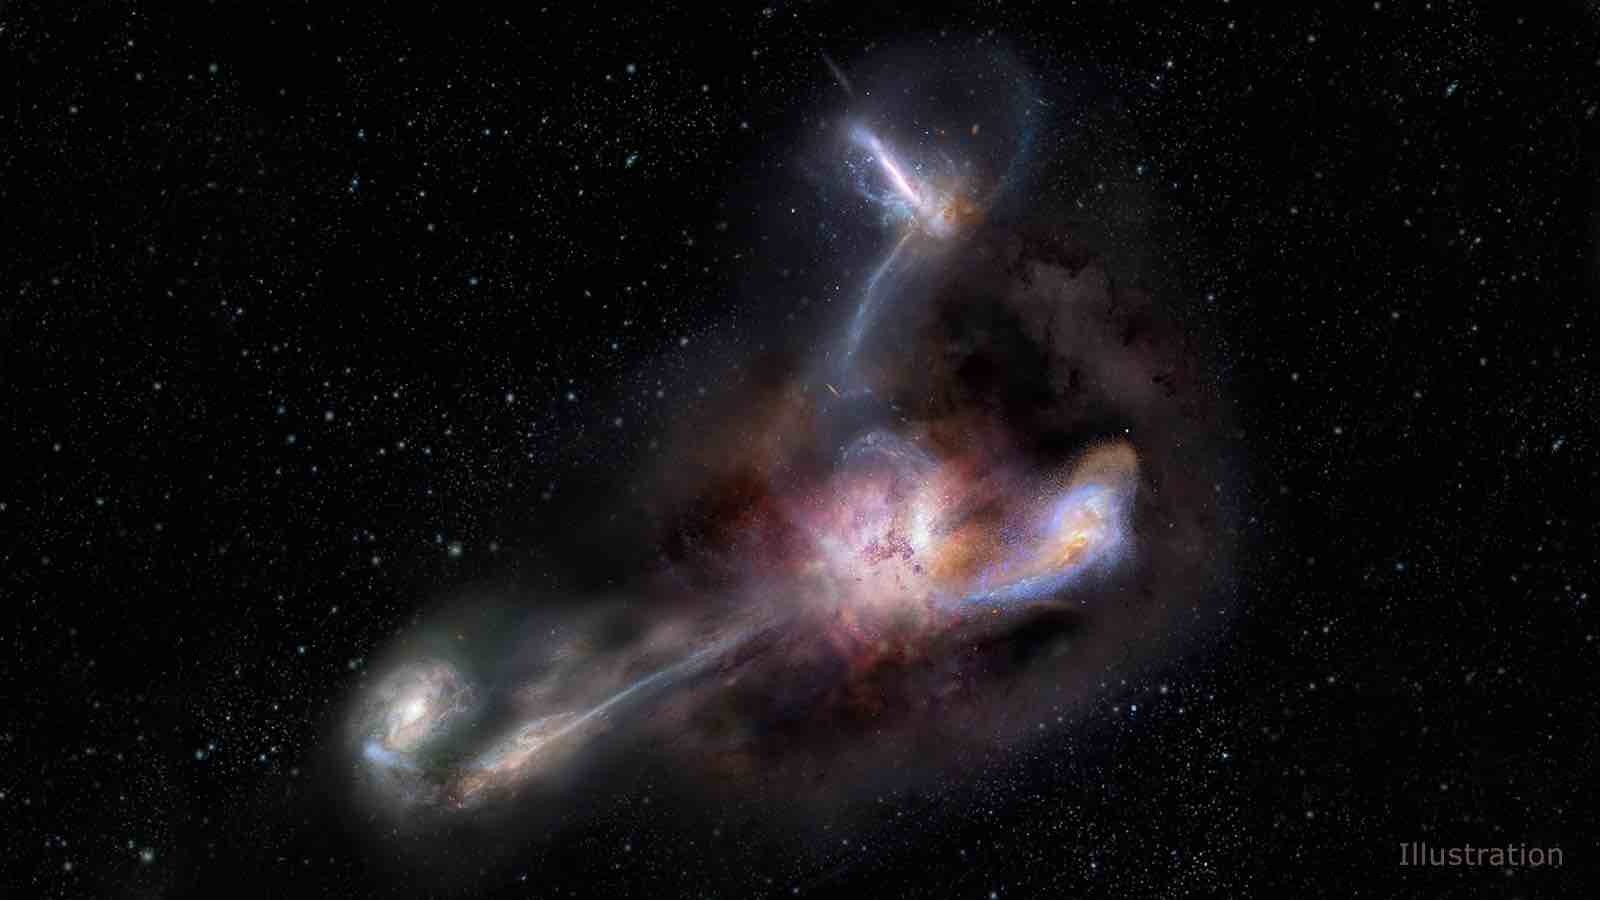 Galaxy eating neighbors, says new research